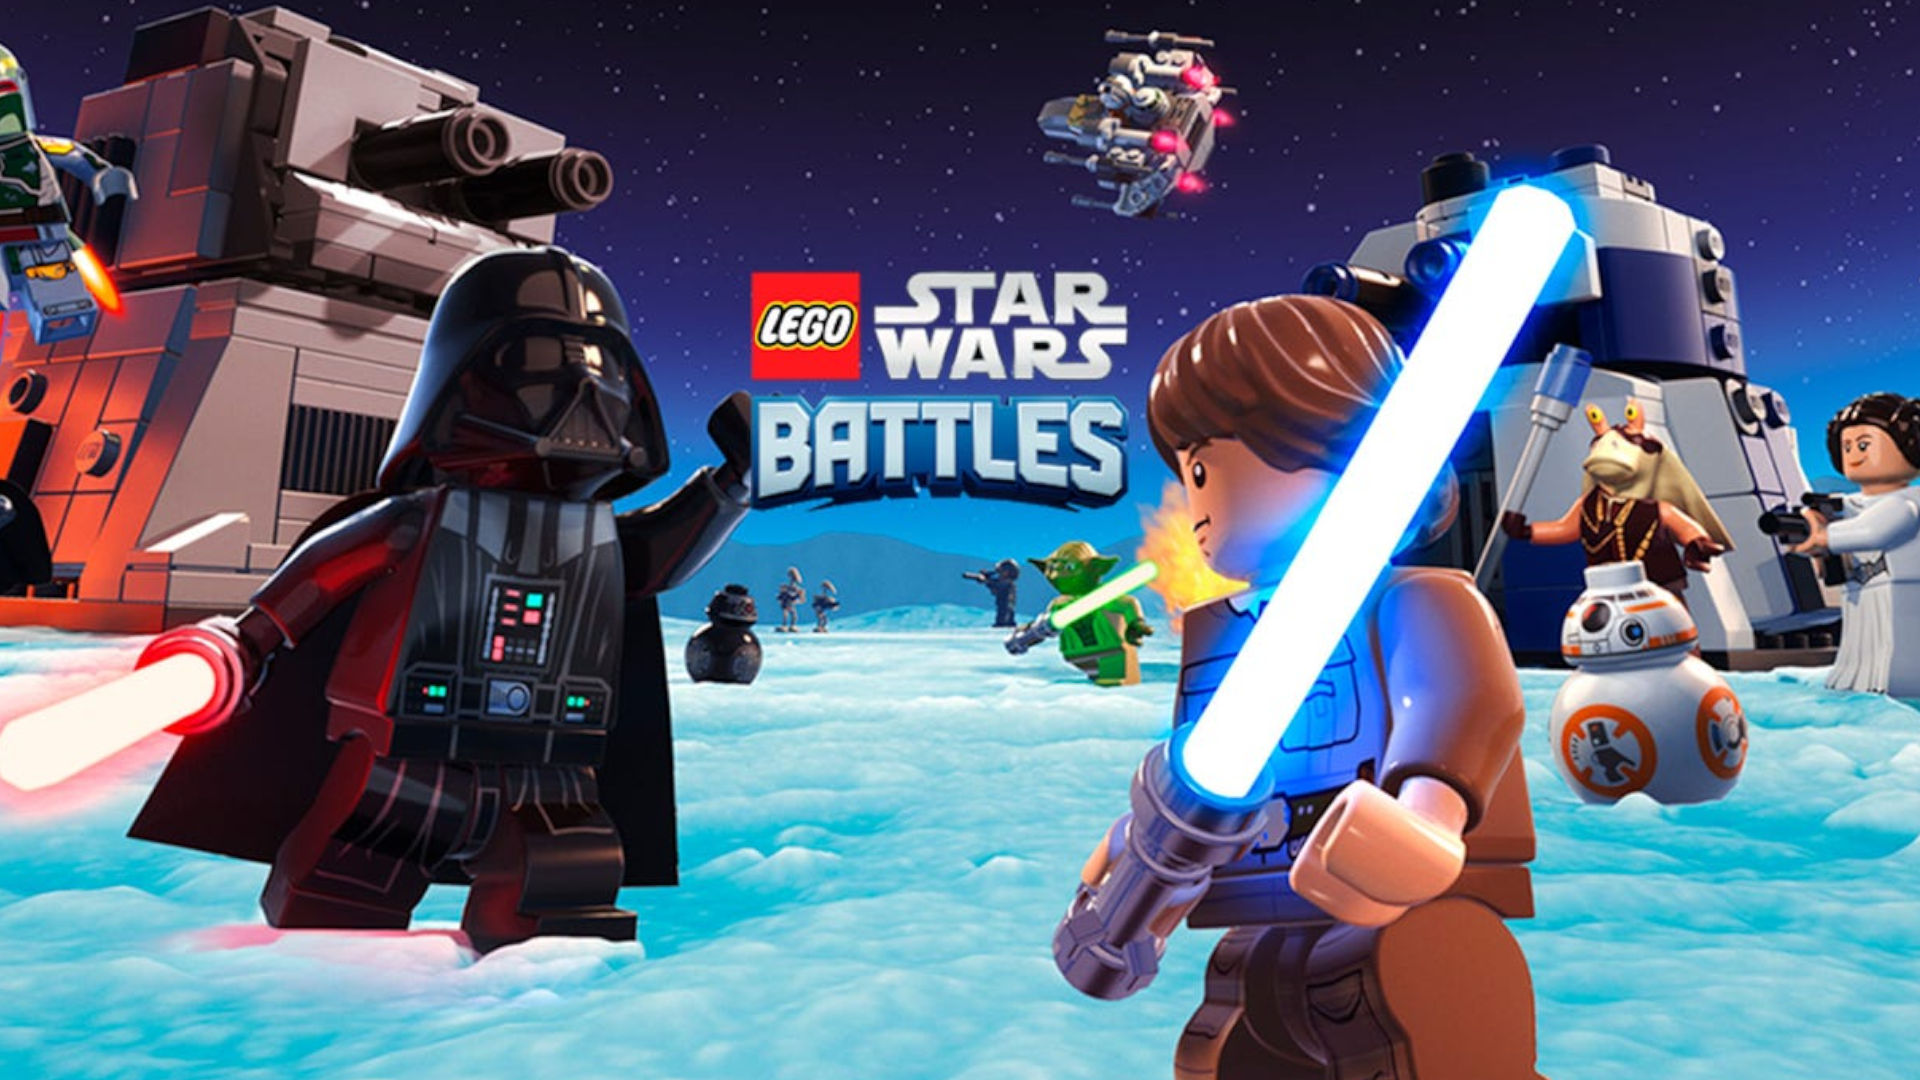 Best space games: LEGO Star Wars Battles. Image shows Darth Vader and Luke Skywalker about to fight in the snow.